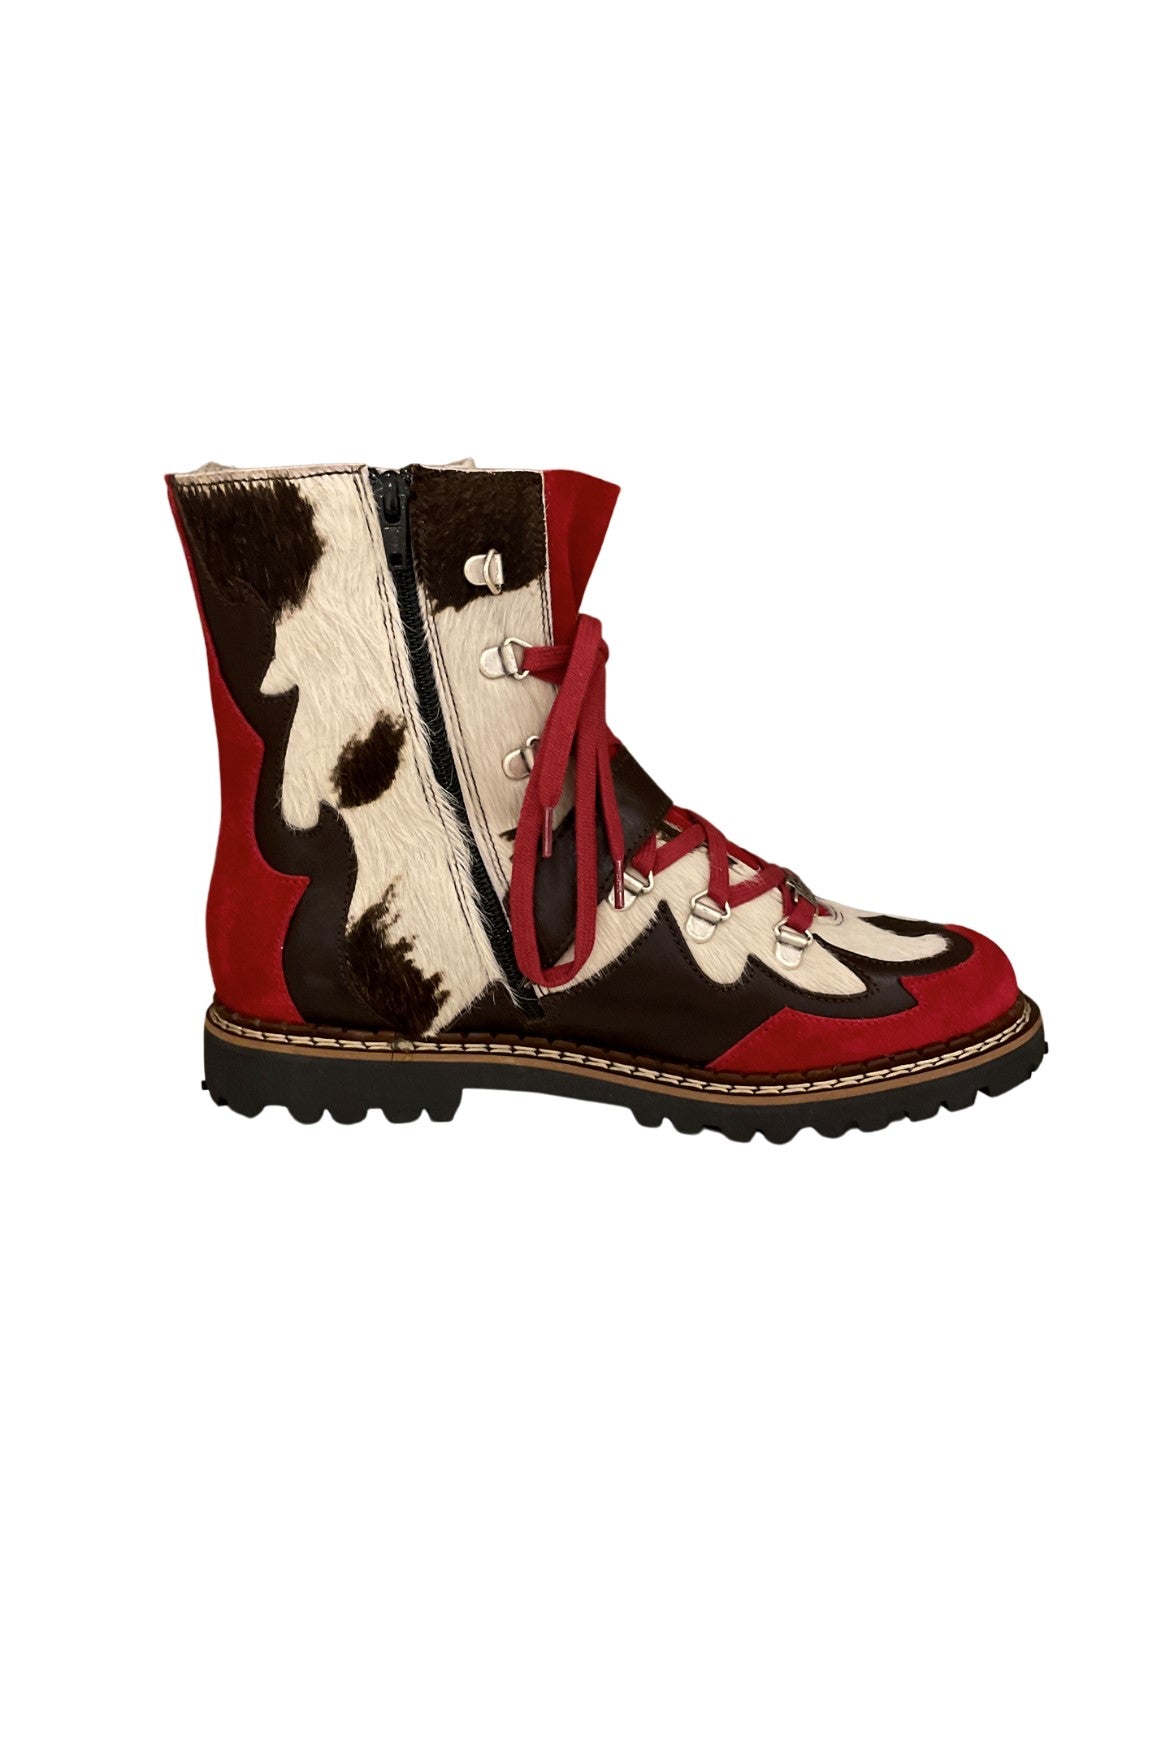 Ammann Country Red Cow Print Ankle Boots w/ Western Buckle